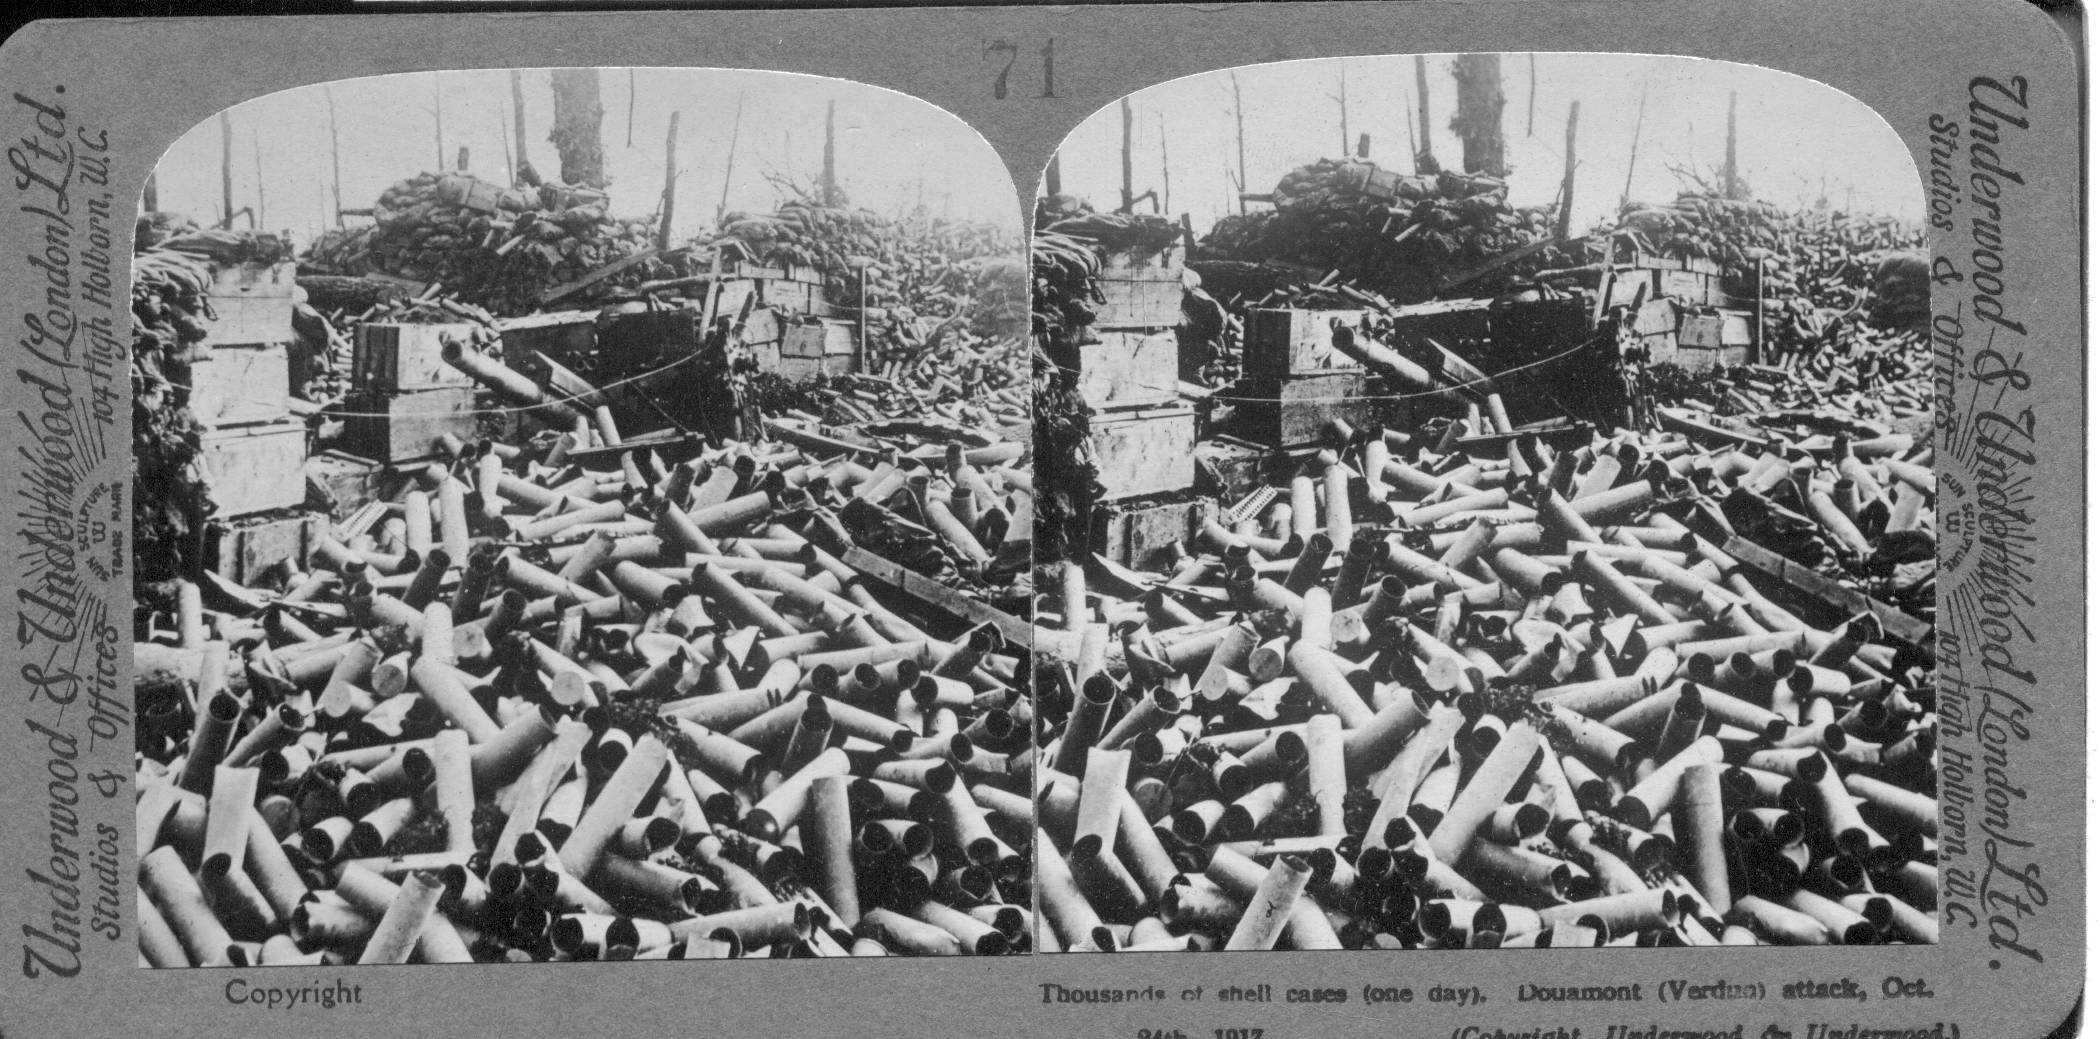 Thousands of shell cases (one day). Douaumont (Verdun) attack, Oct 24th, 1917